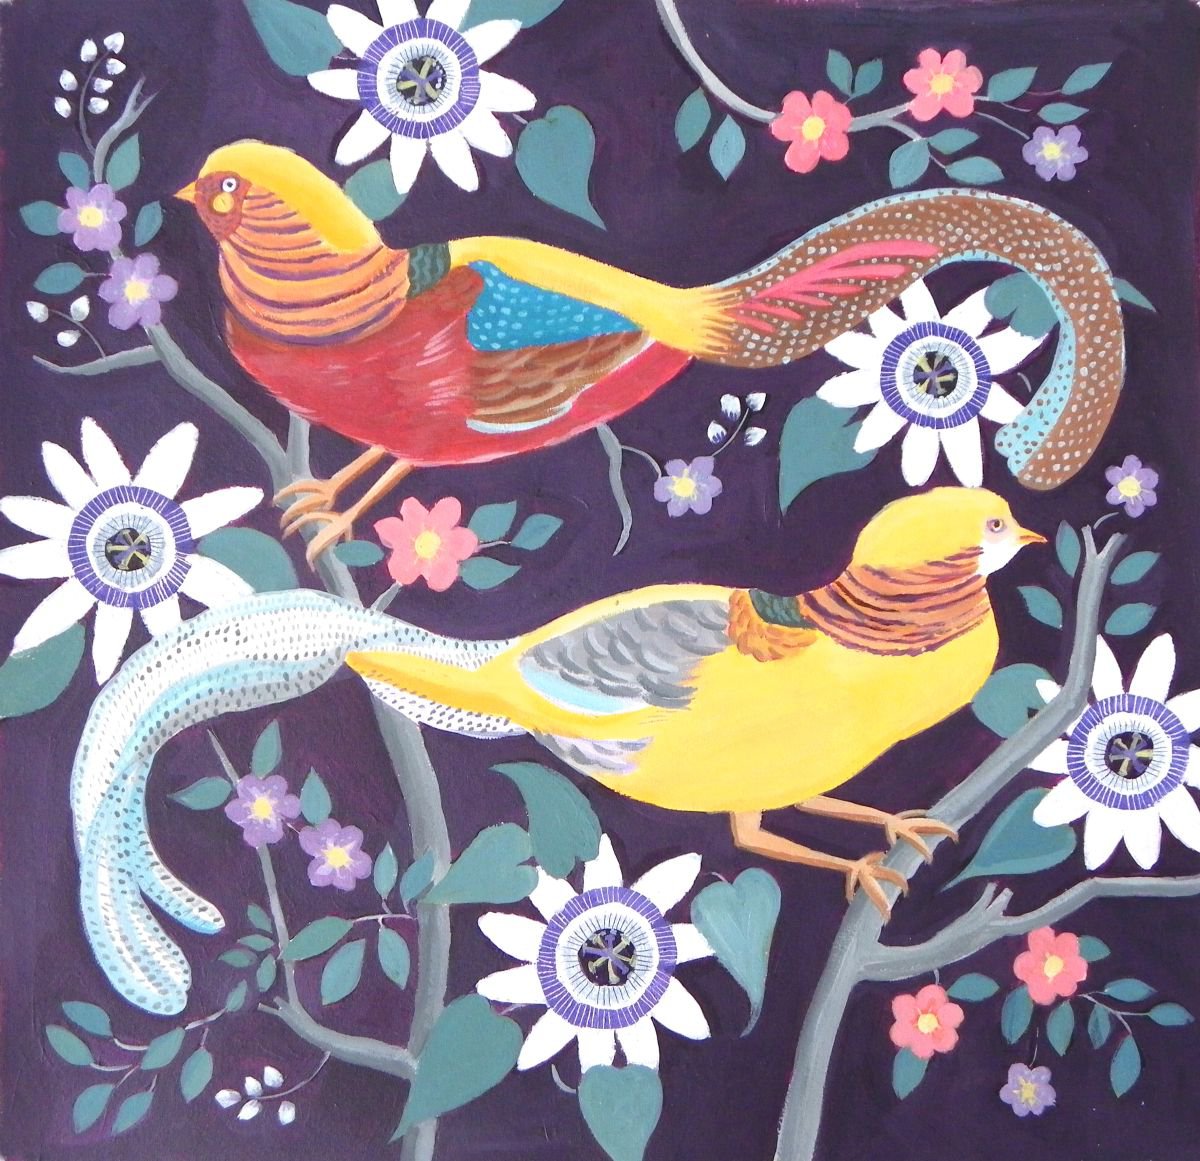 Golden pheasants with flowers by Mary Stubberfield